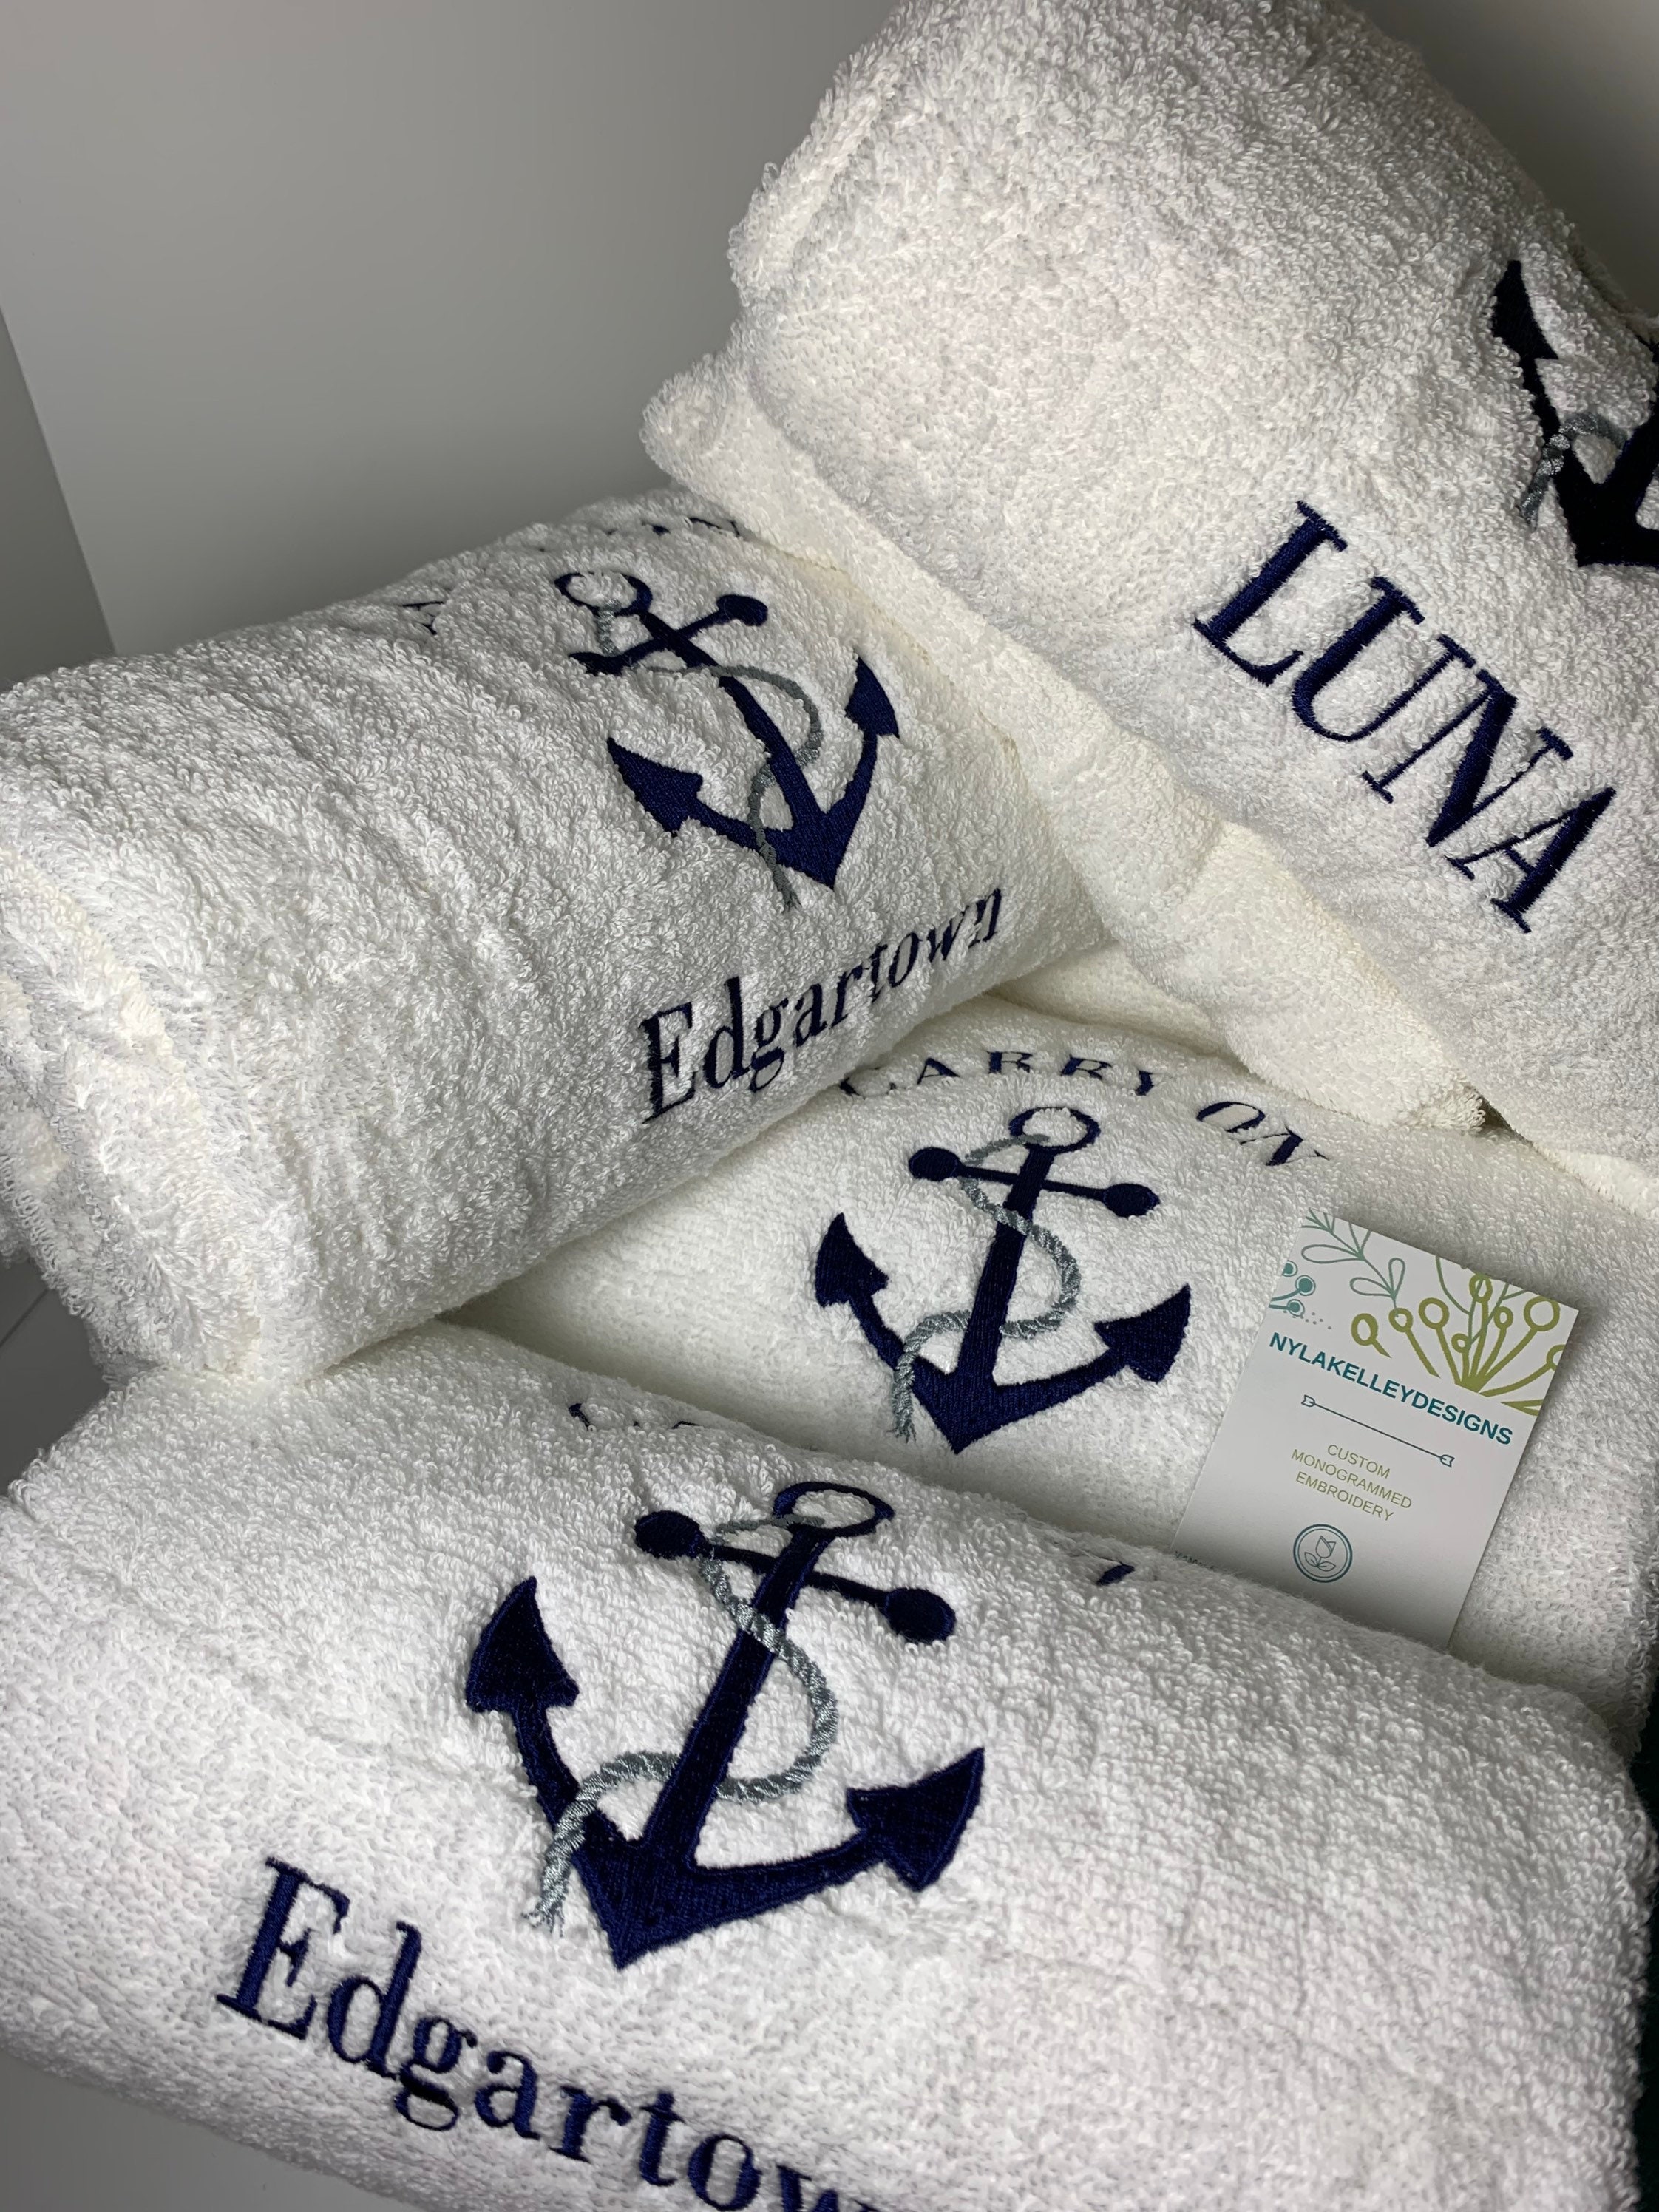 Fishing Towel Personalized 